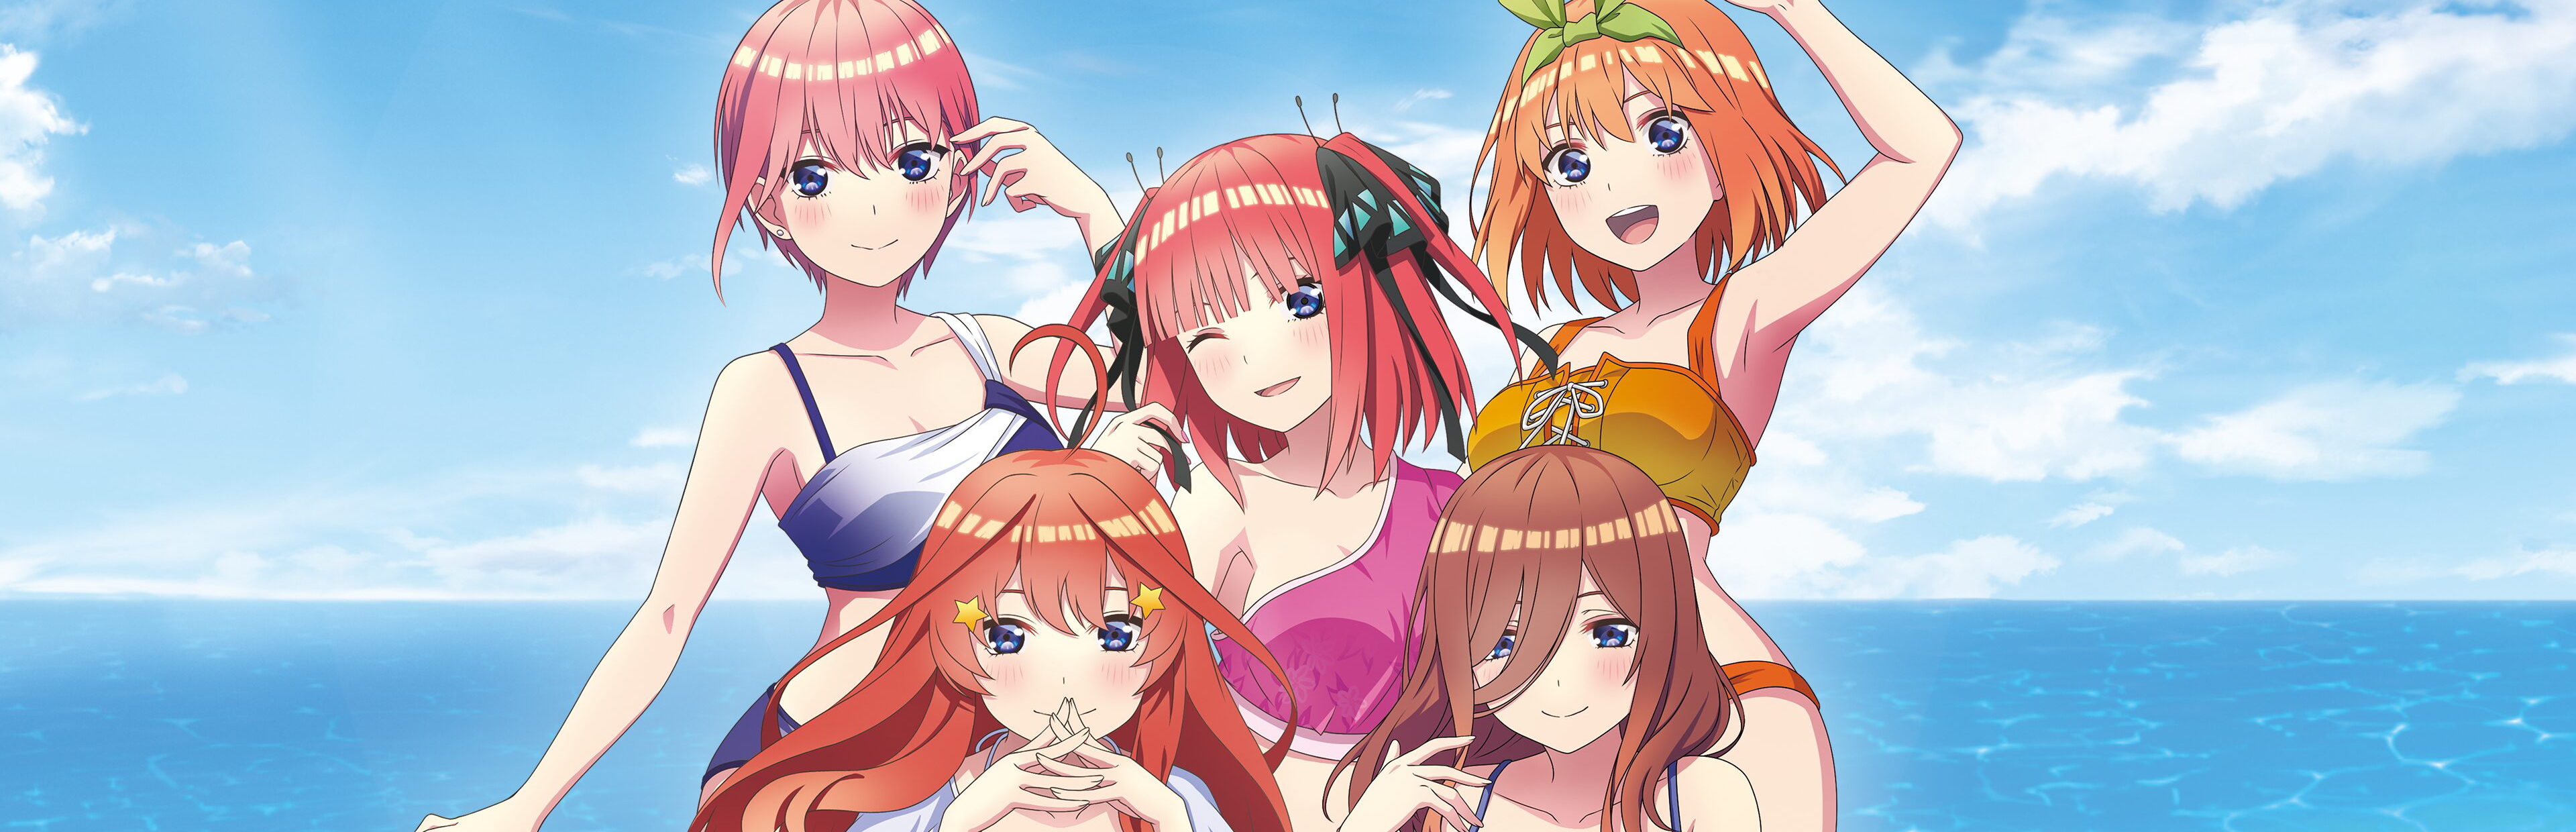 The Quintessential Quintuplets the Movie: Five Memories of My Time